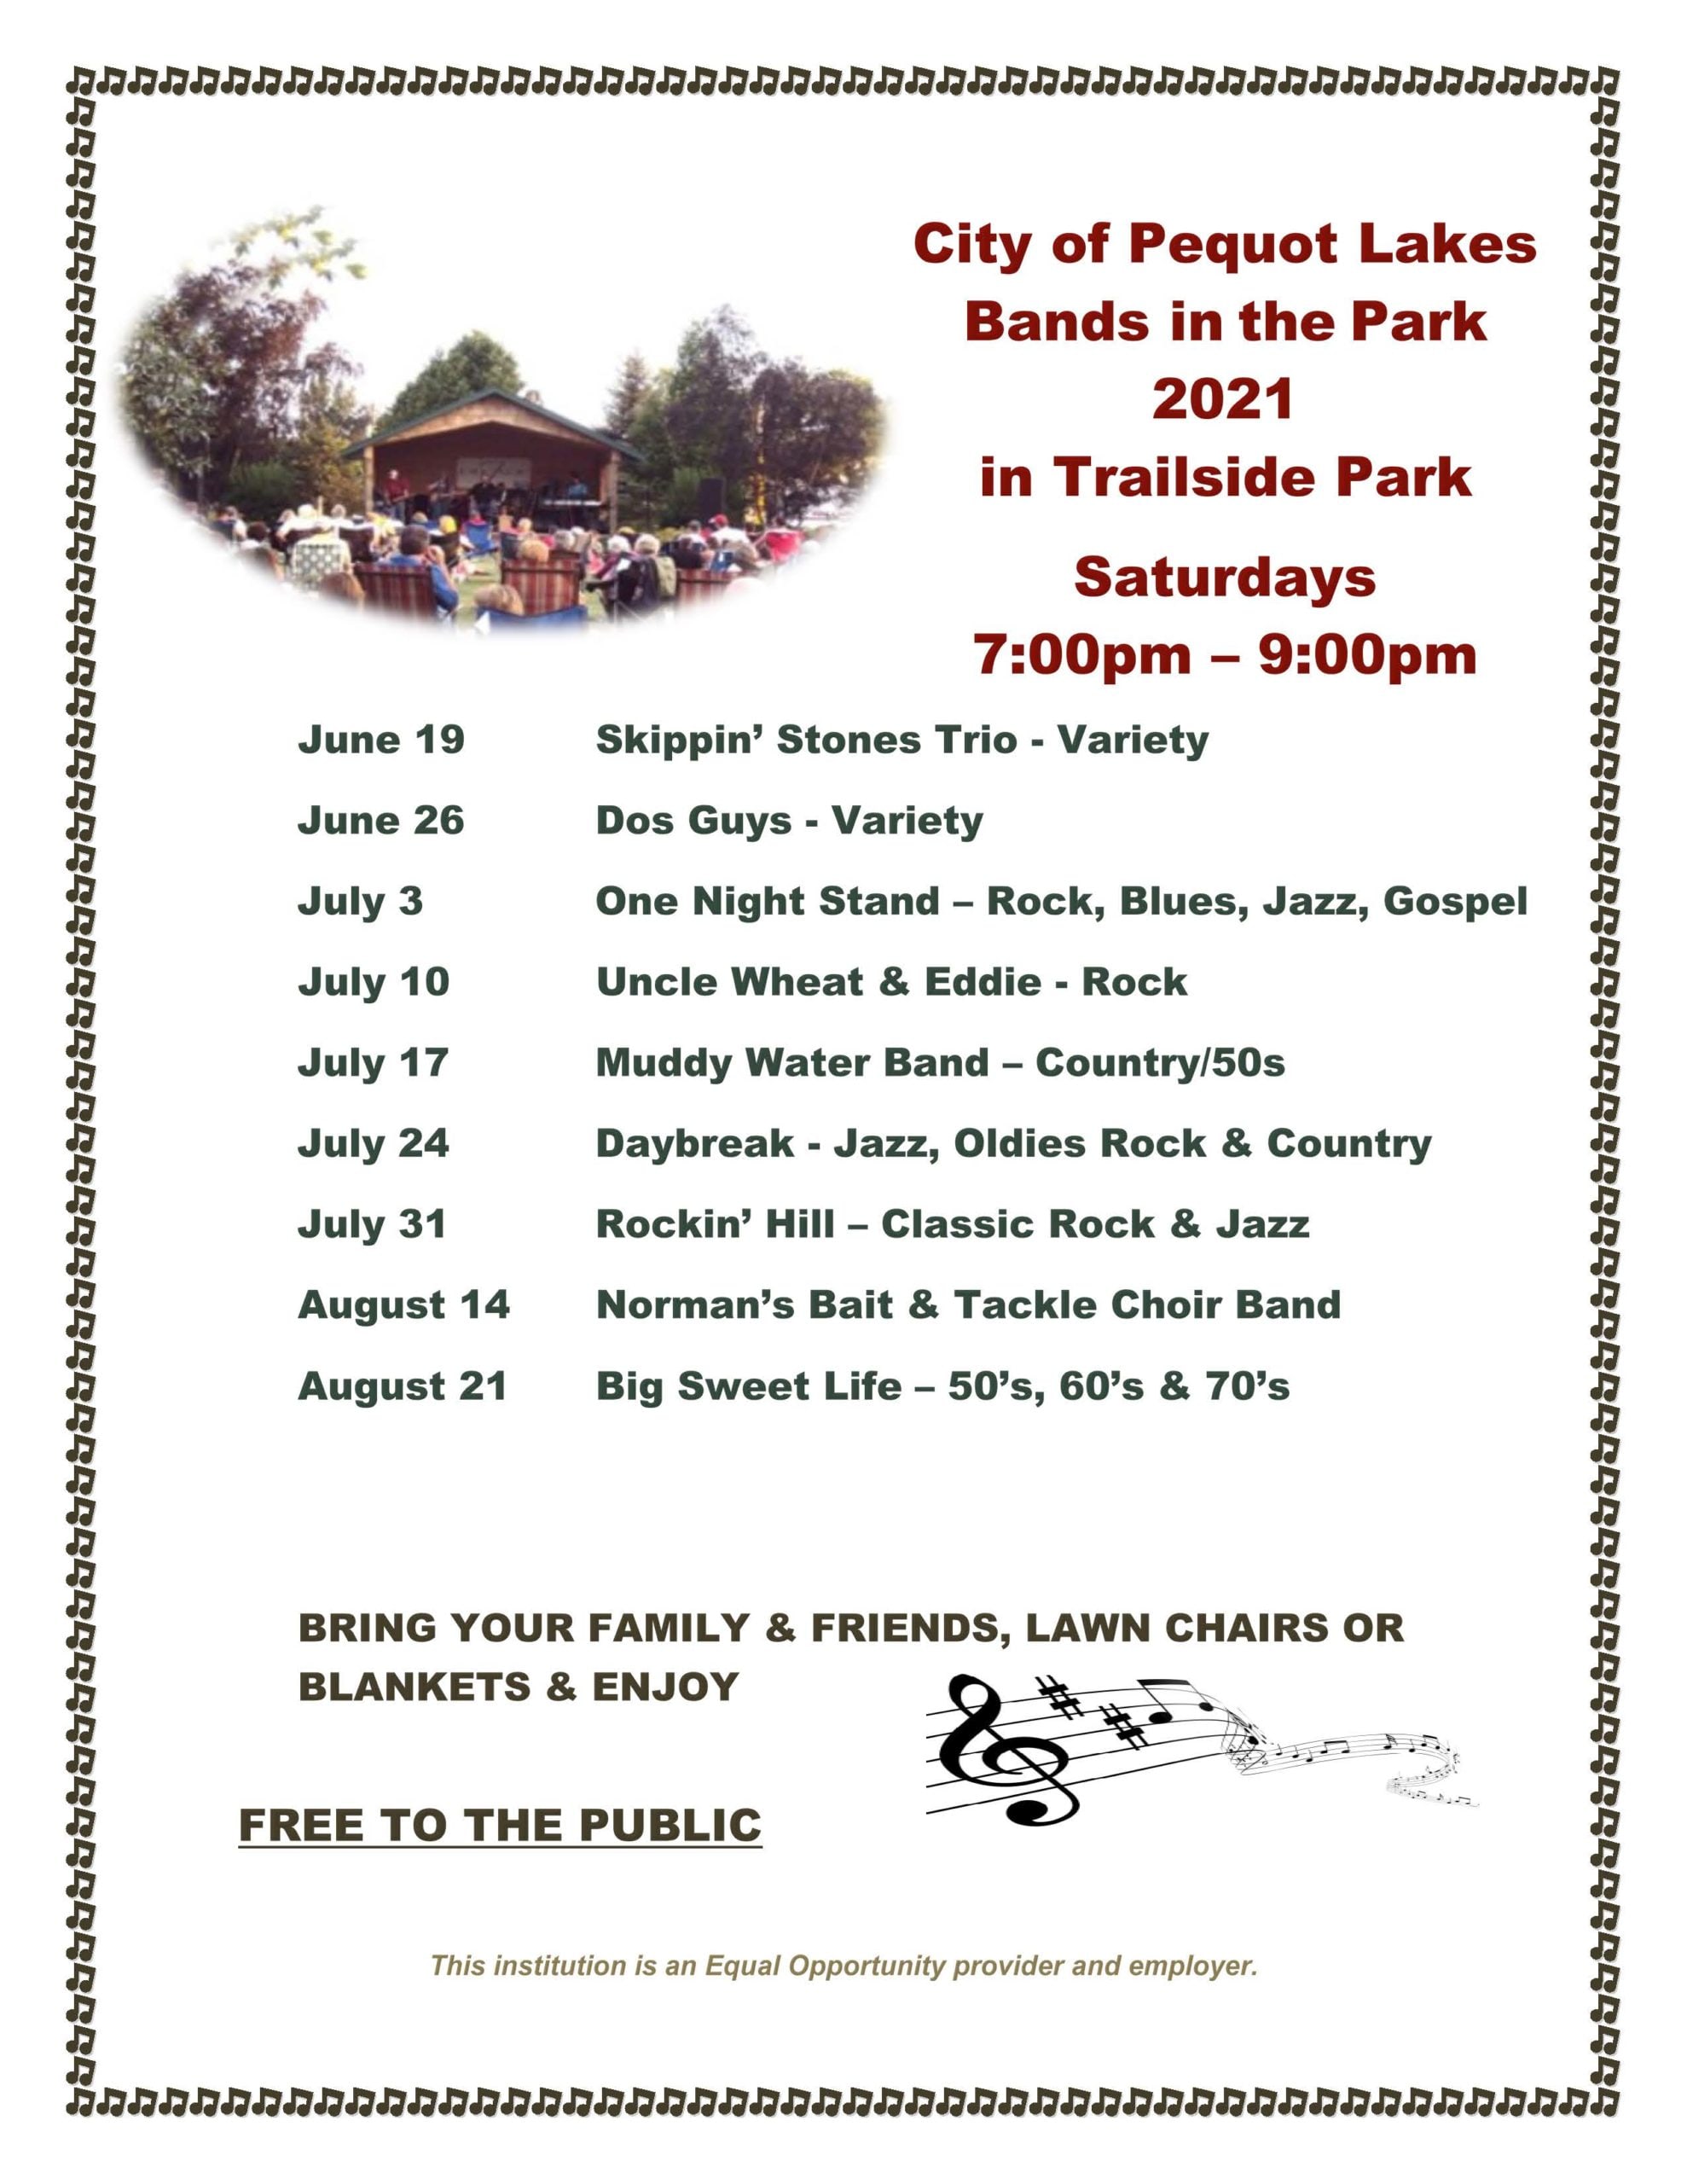 Bands in the Park